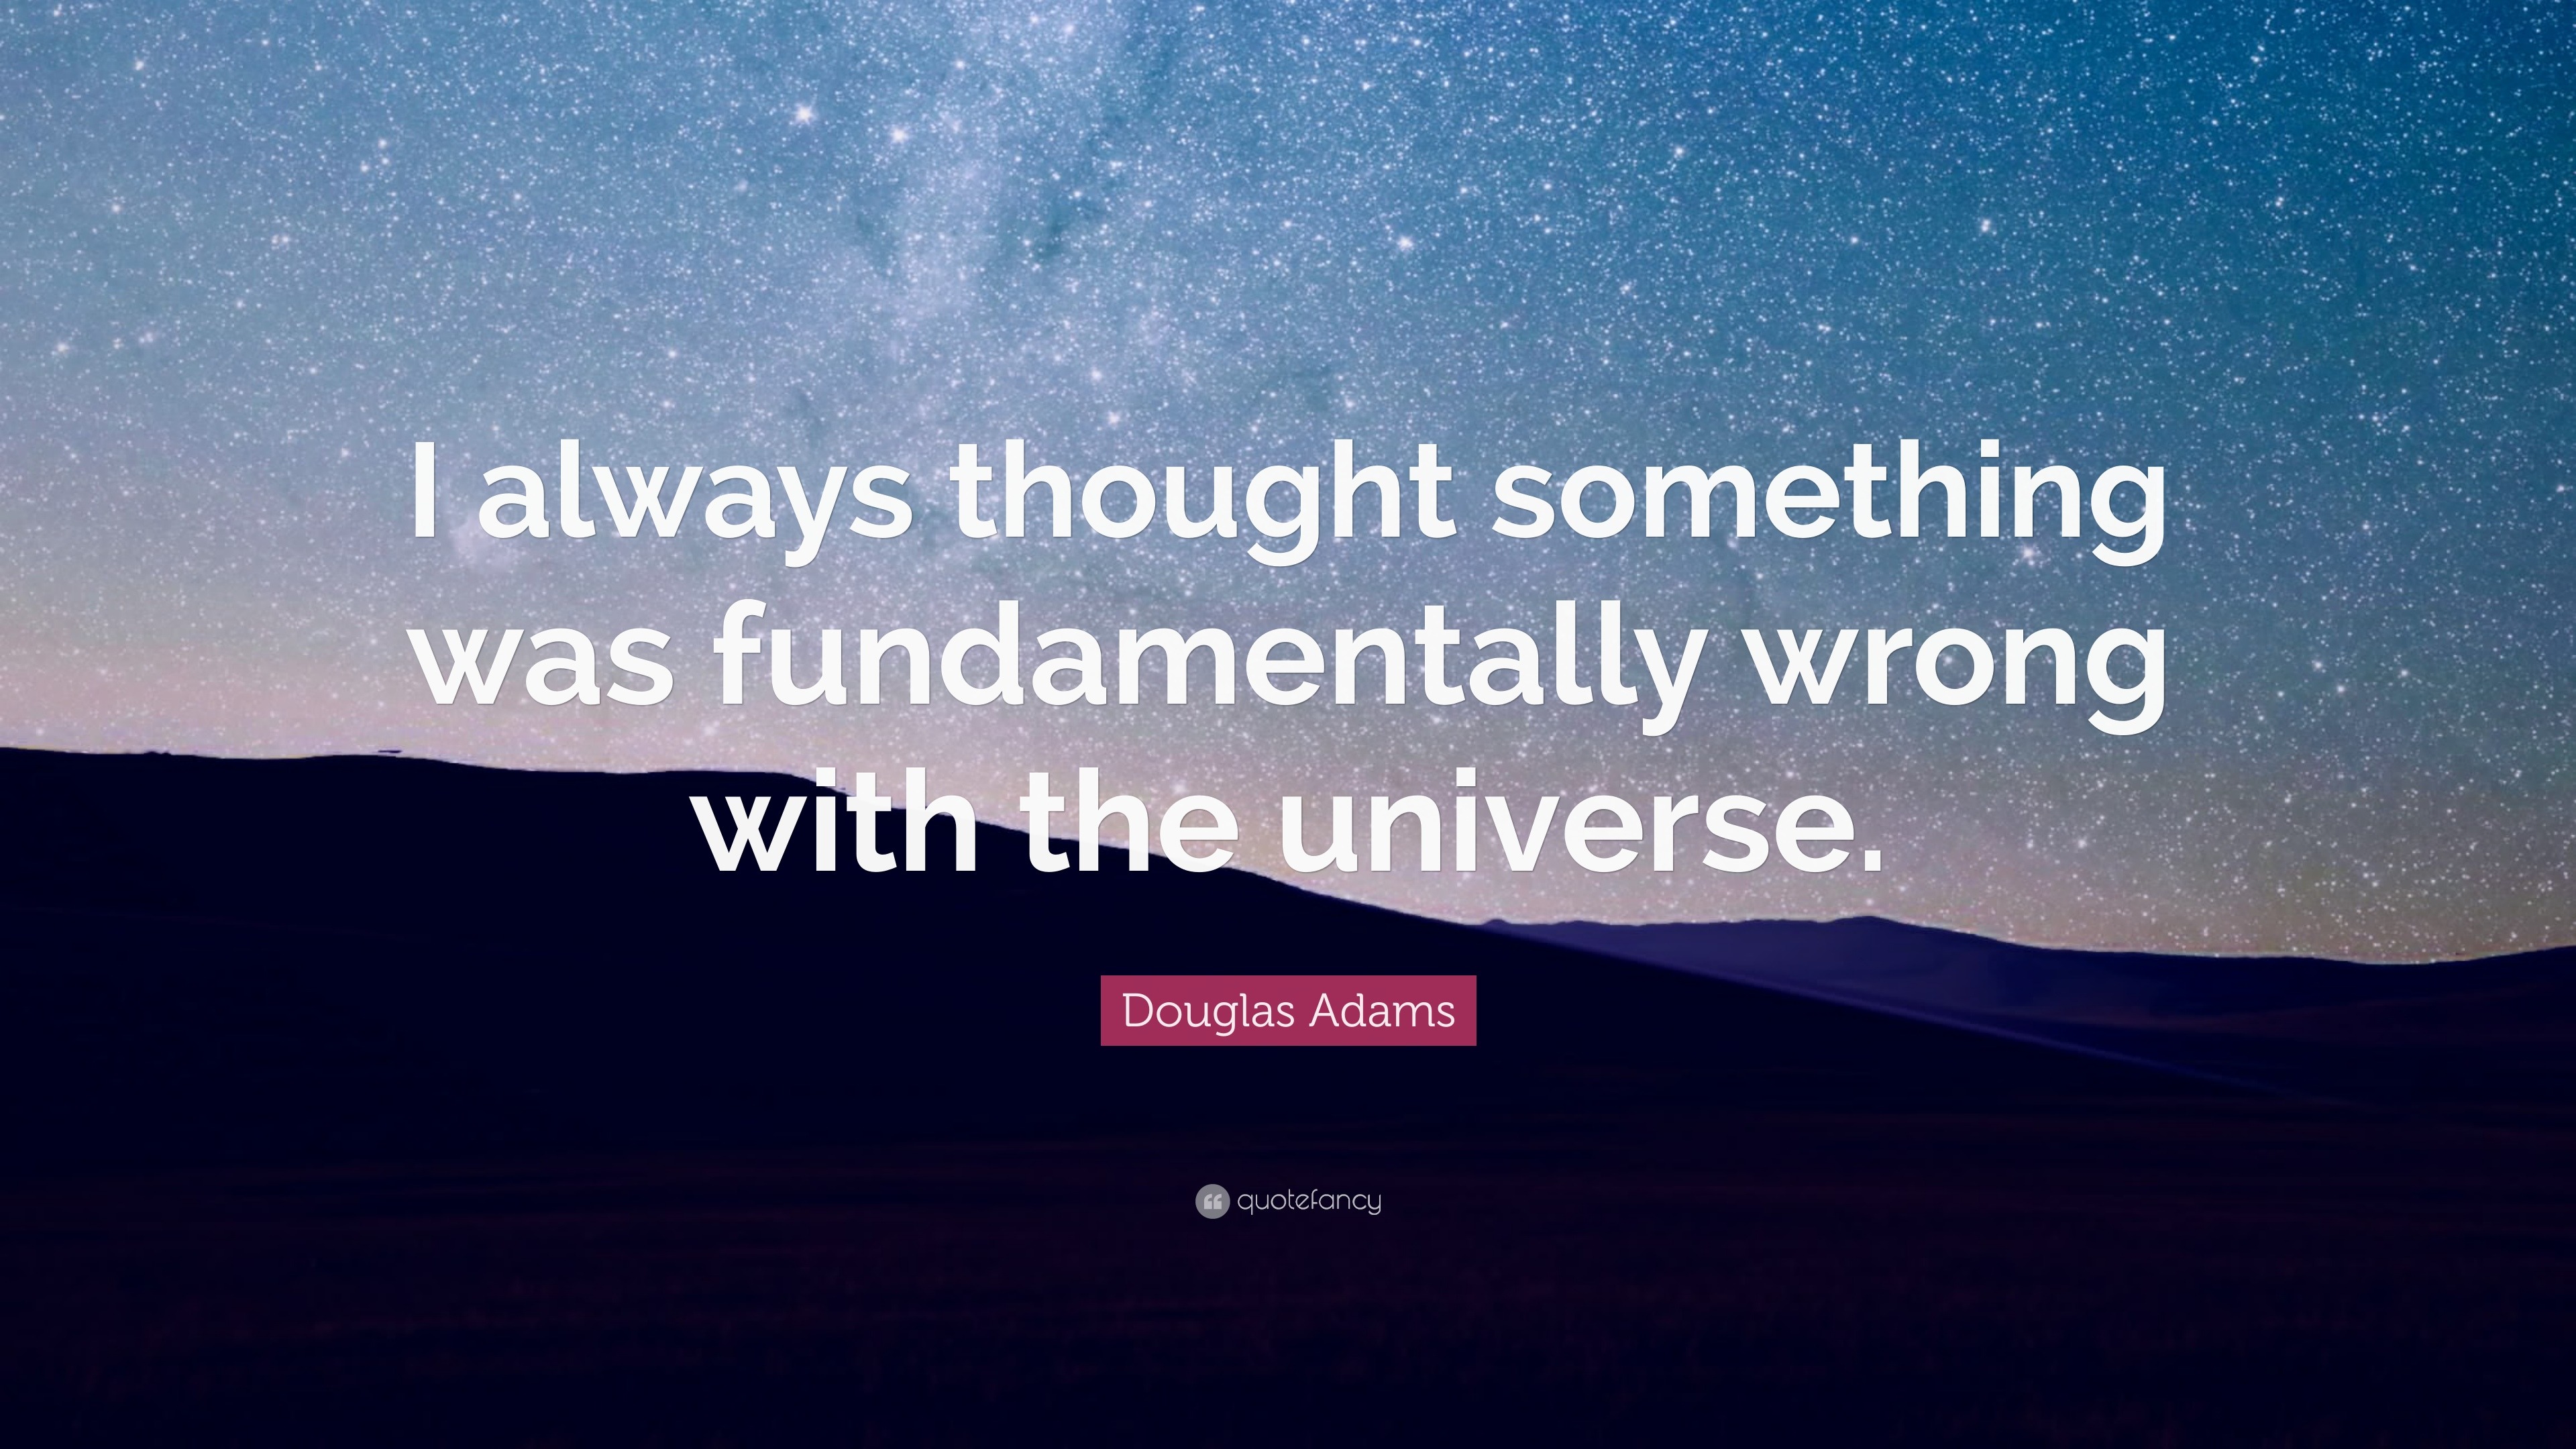 Douglas Adams Quote: “I always thought something was fundamentally ...